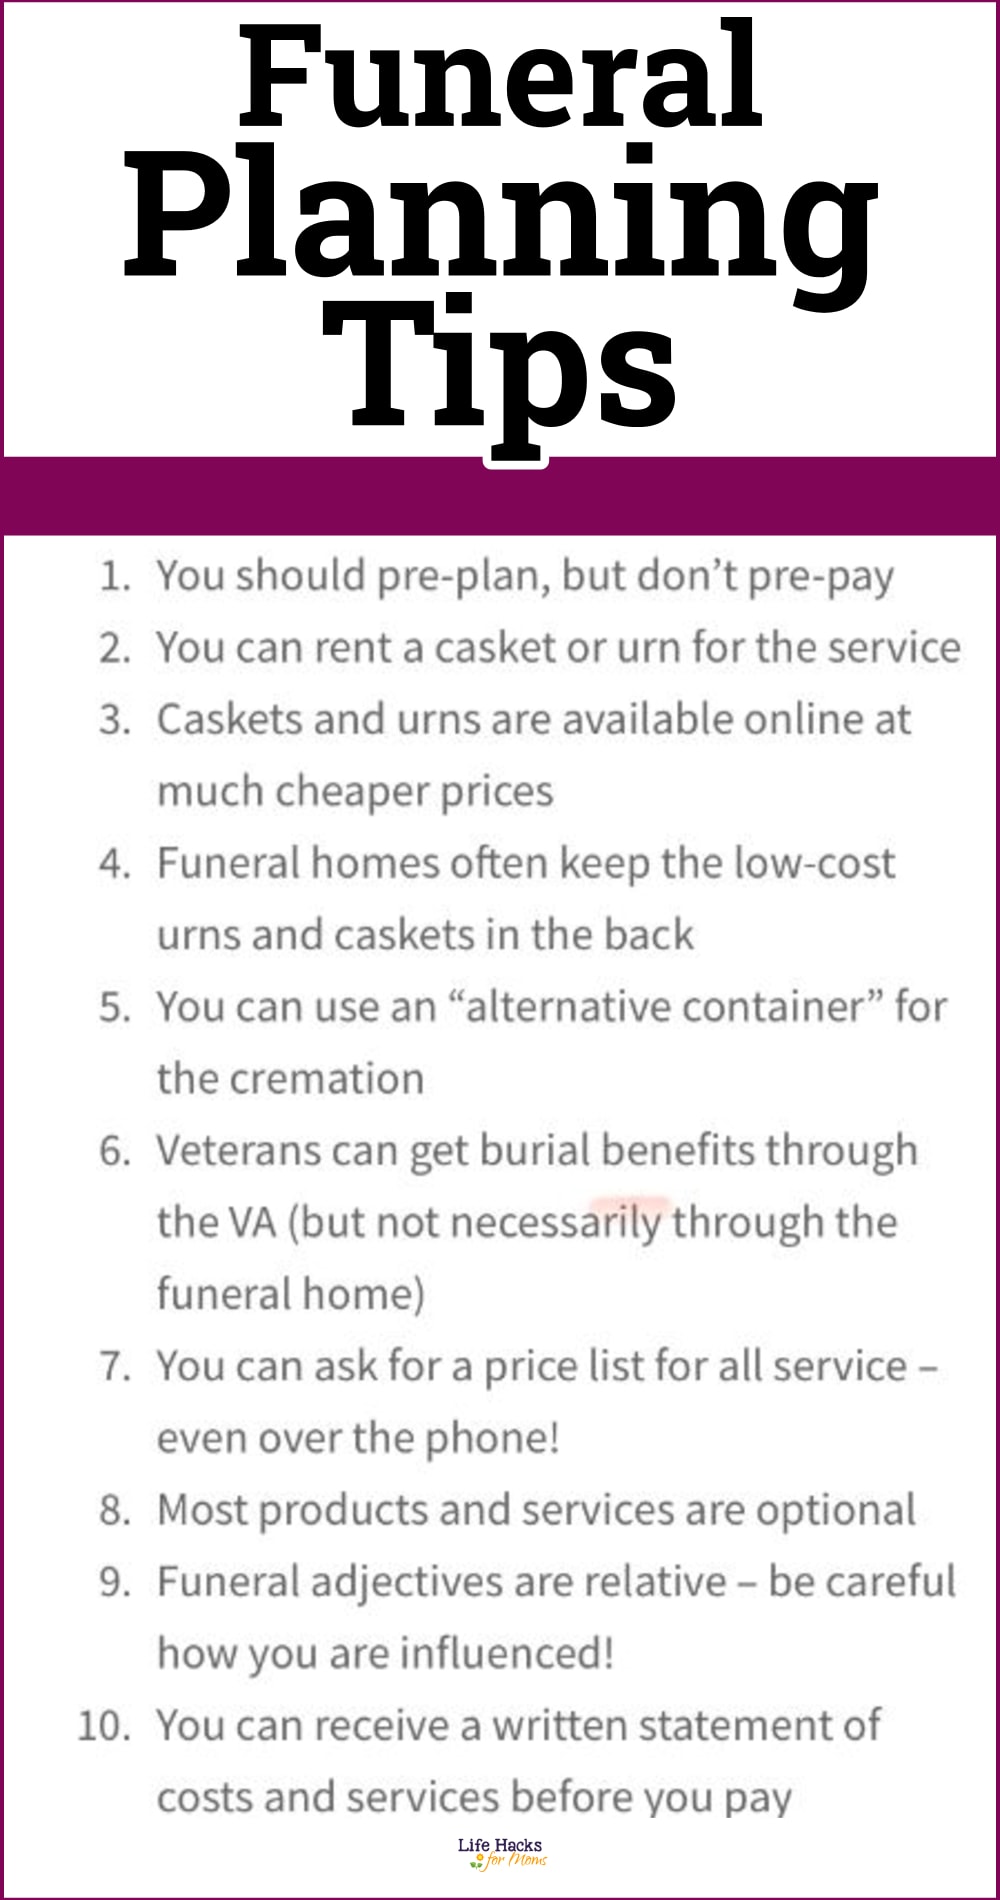 funeral planning tips checklist to reduce cost of a funeral and save money